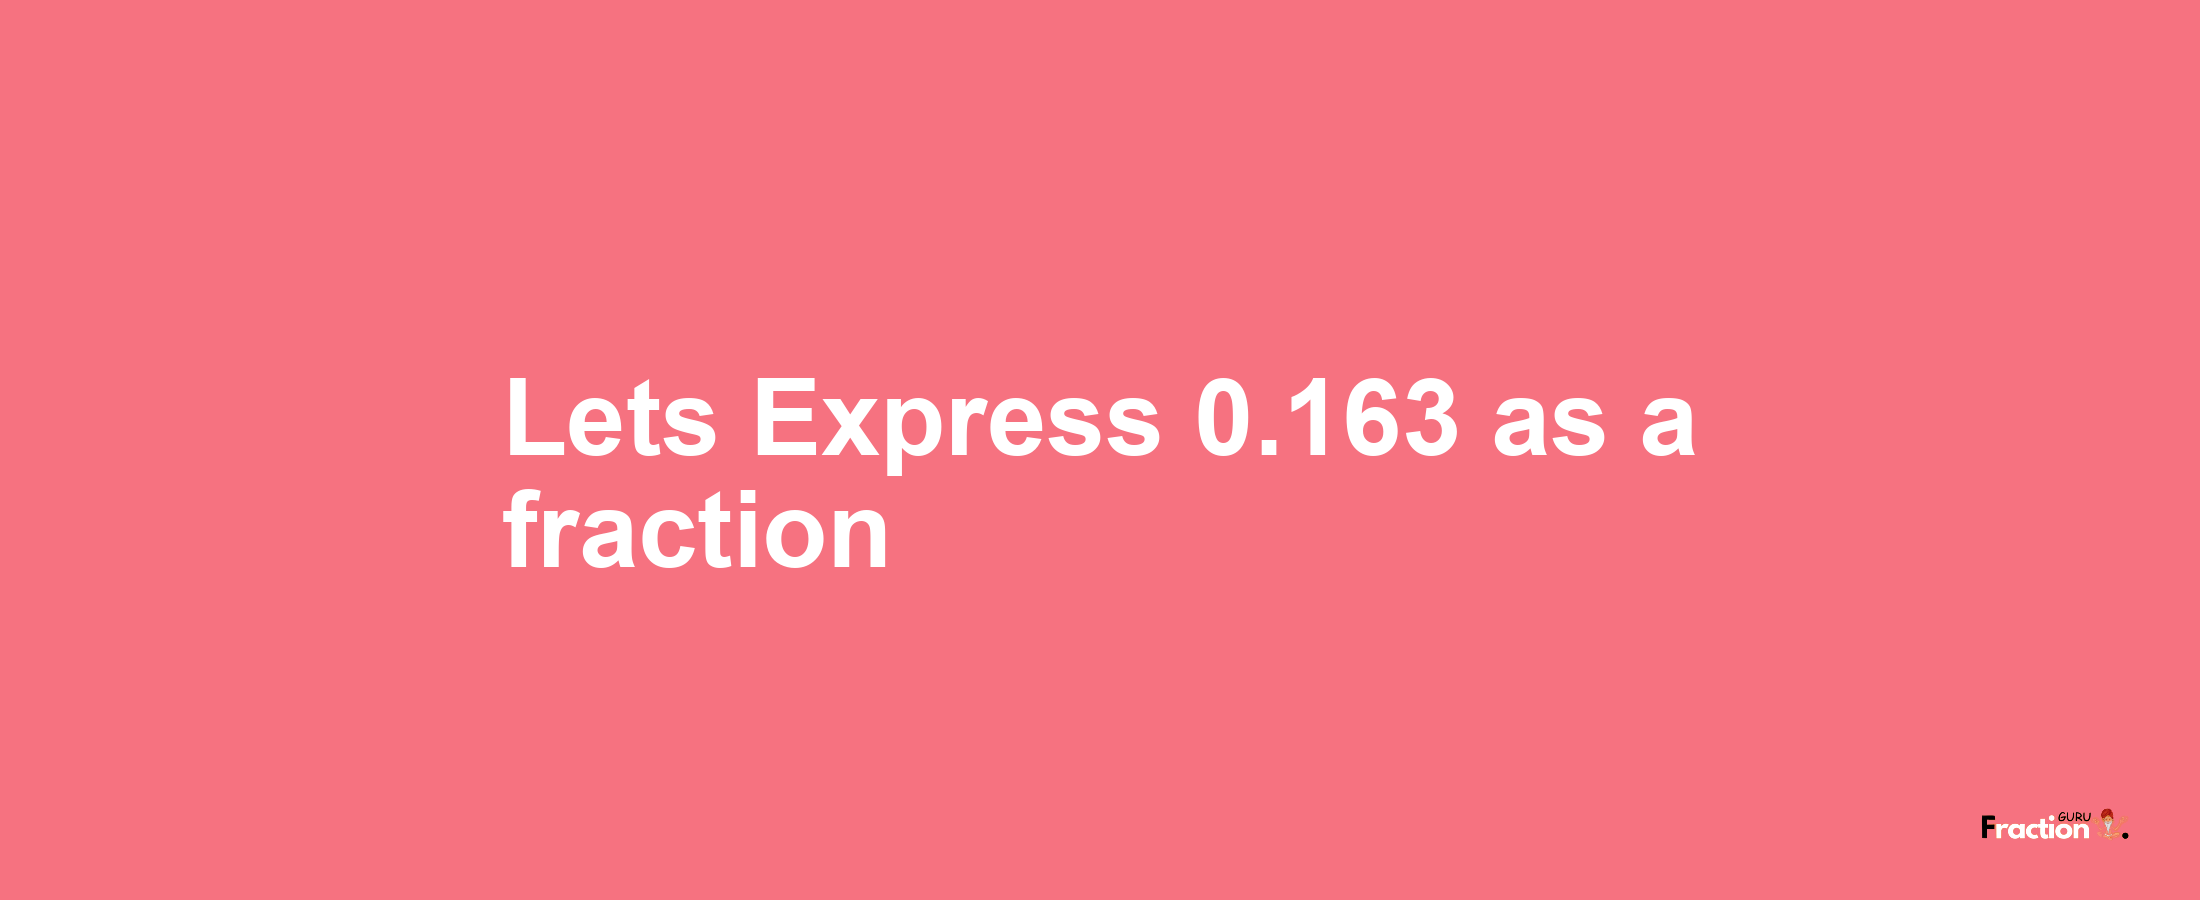 Lets Express 0.163 as afraction